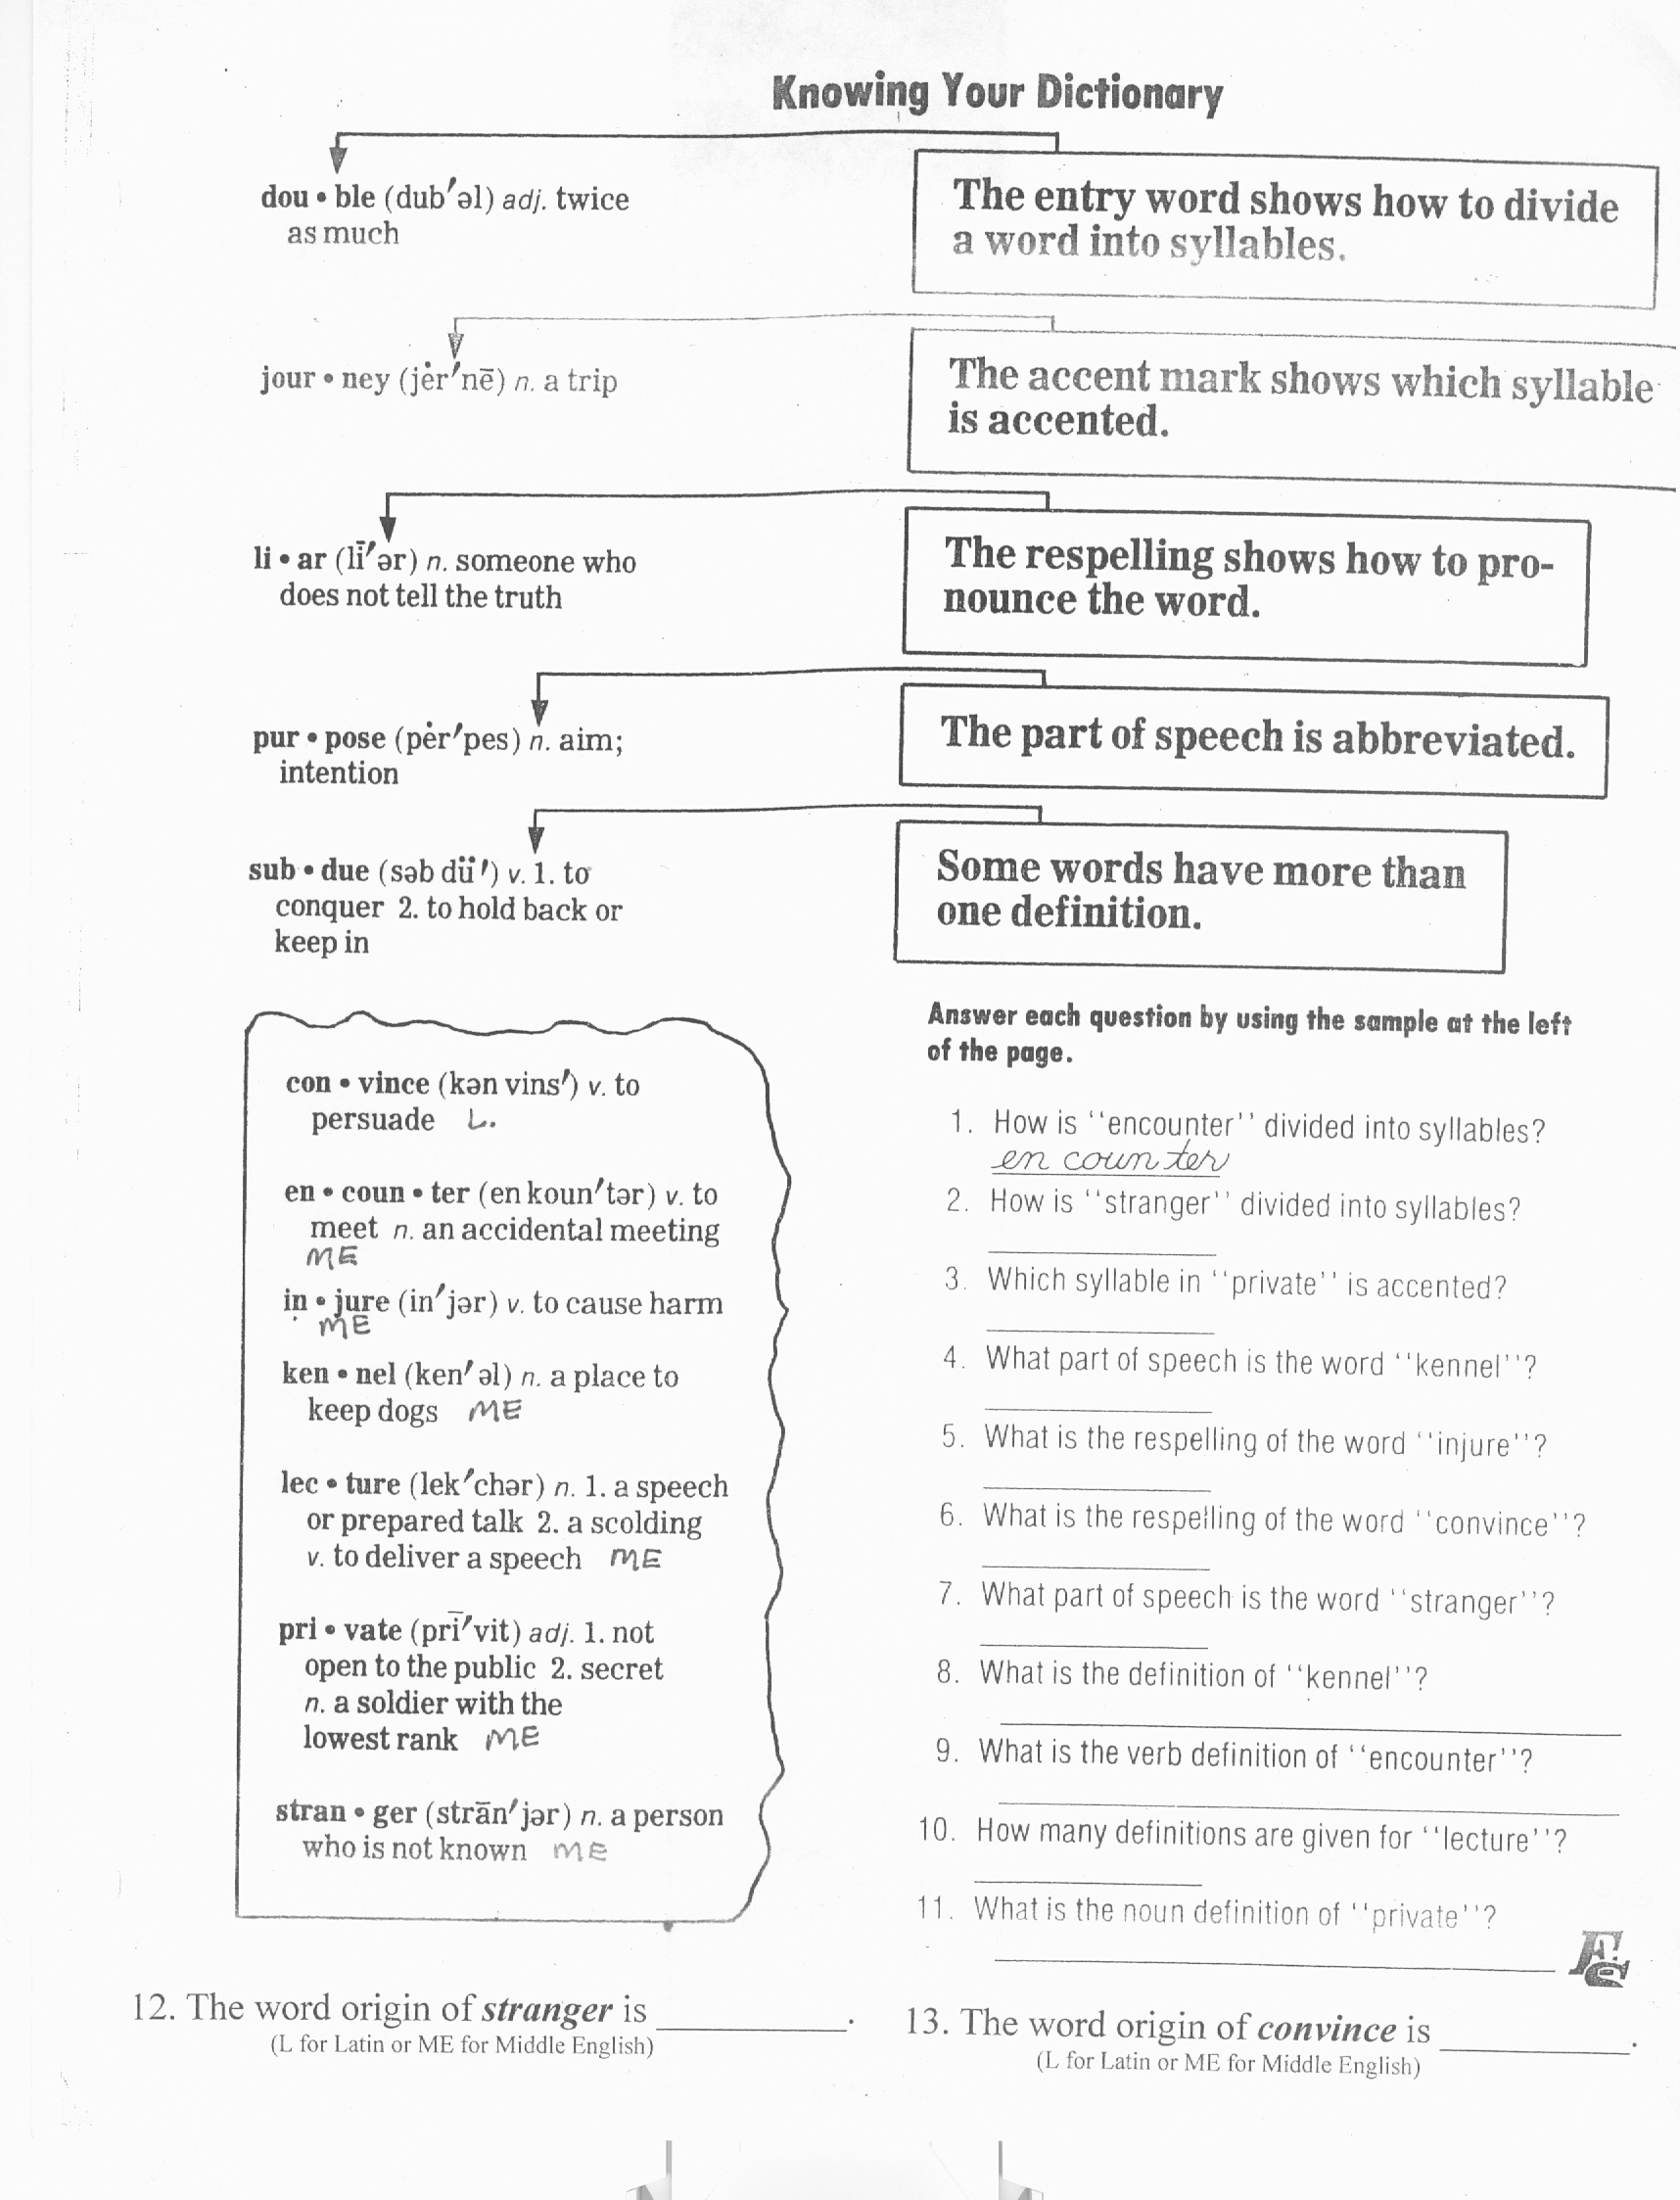 14-best-images-of-using-a-dictionary-worksheets-dictionary-worksheet